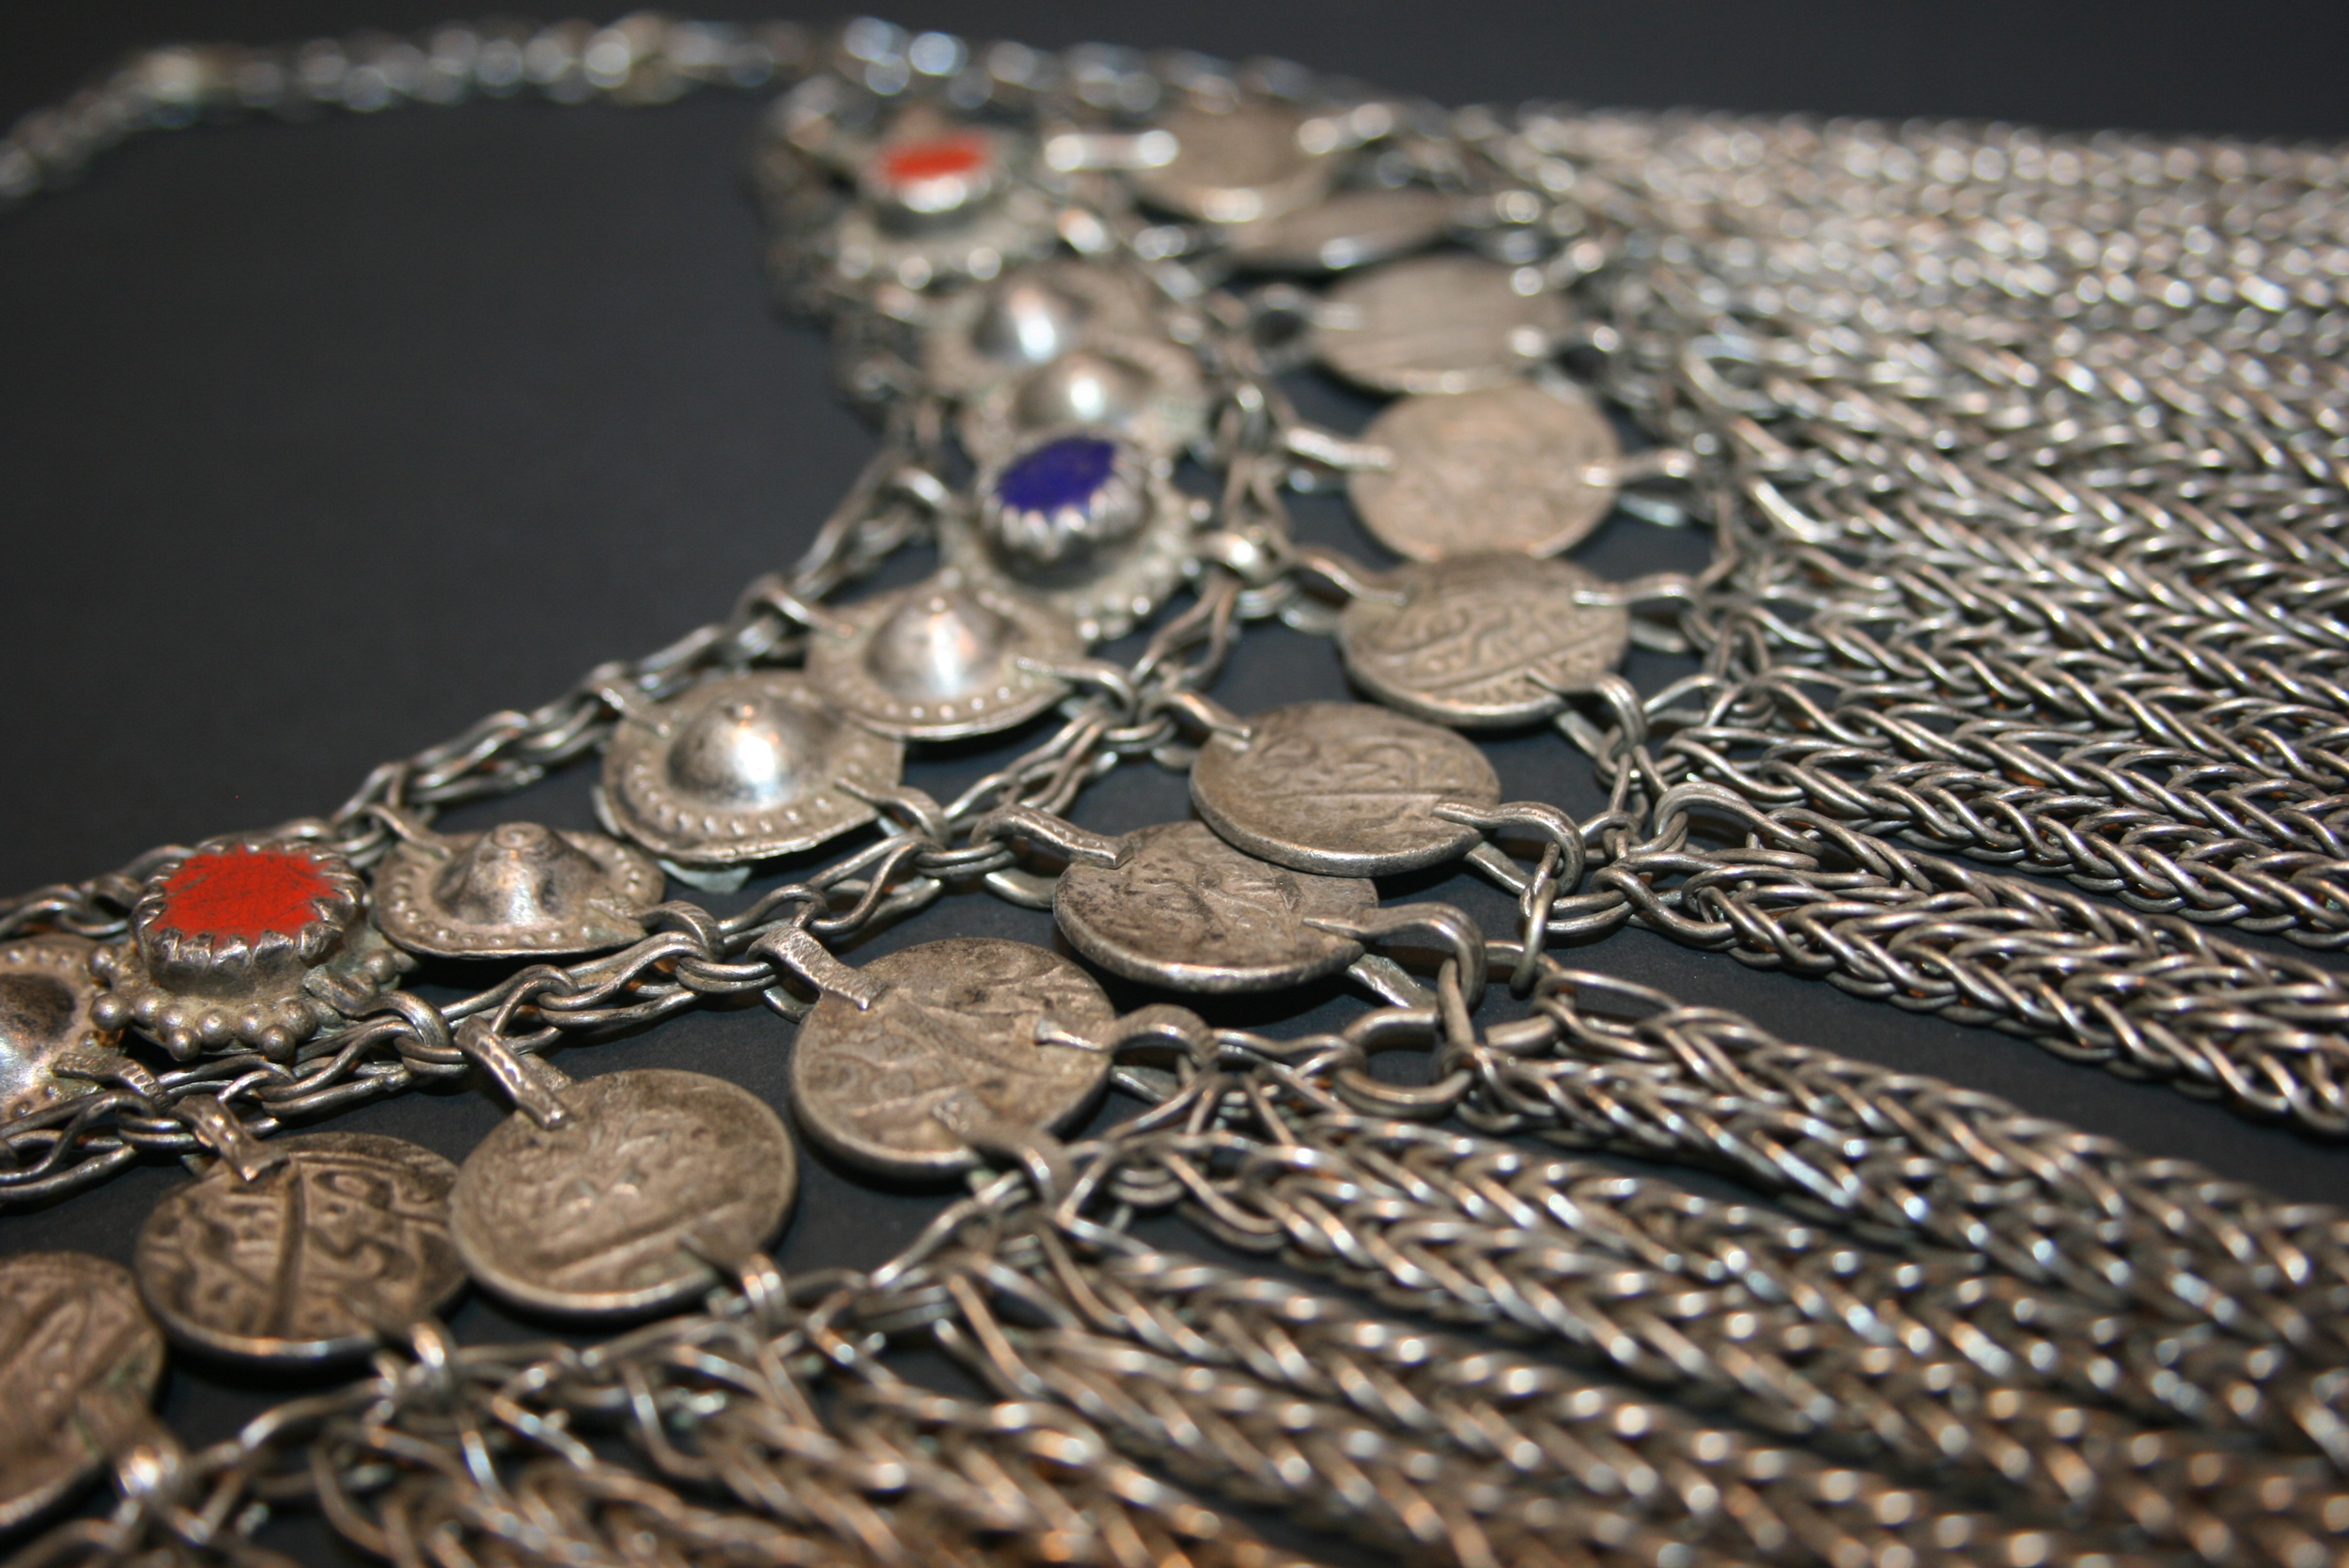 Old 19th century Bukhara necklace